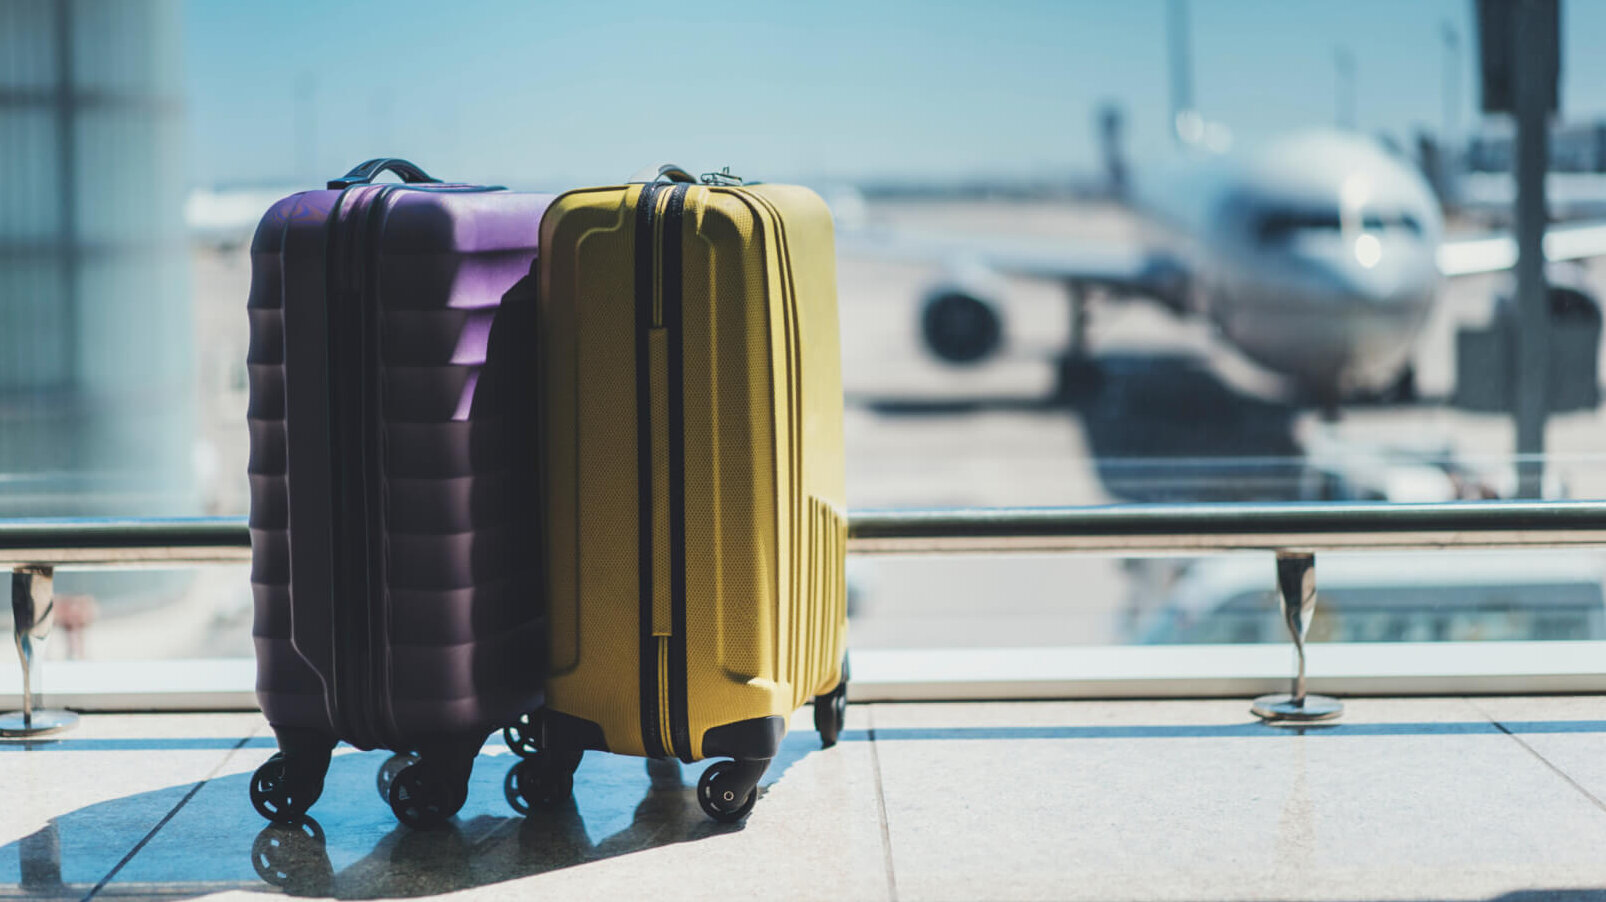 Carry-on packing tips to avoid baggage fees